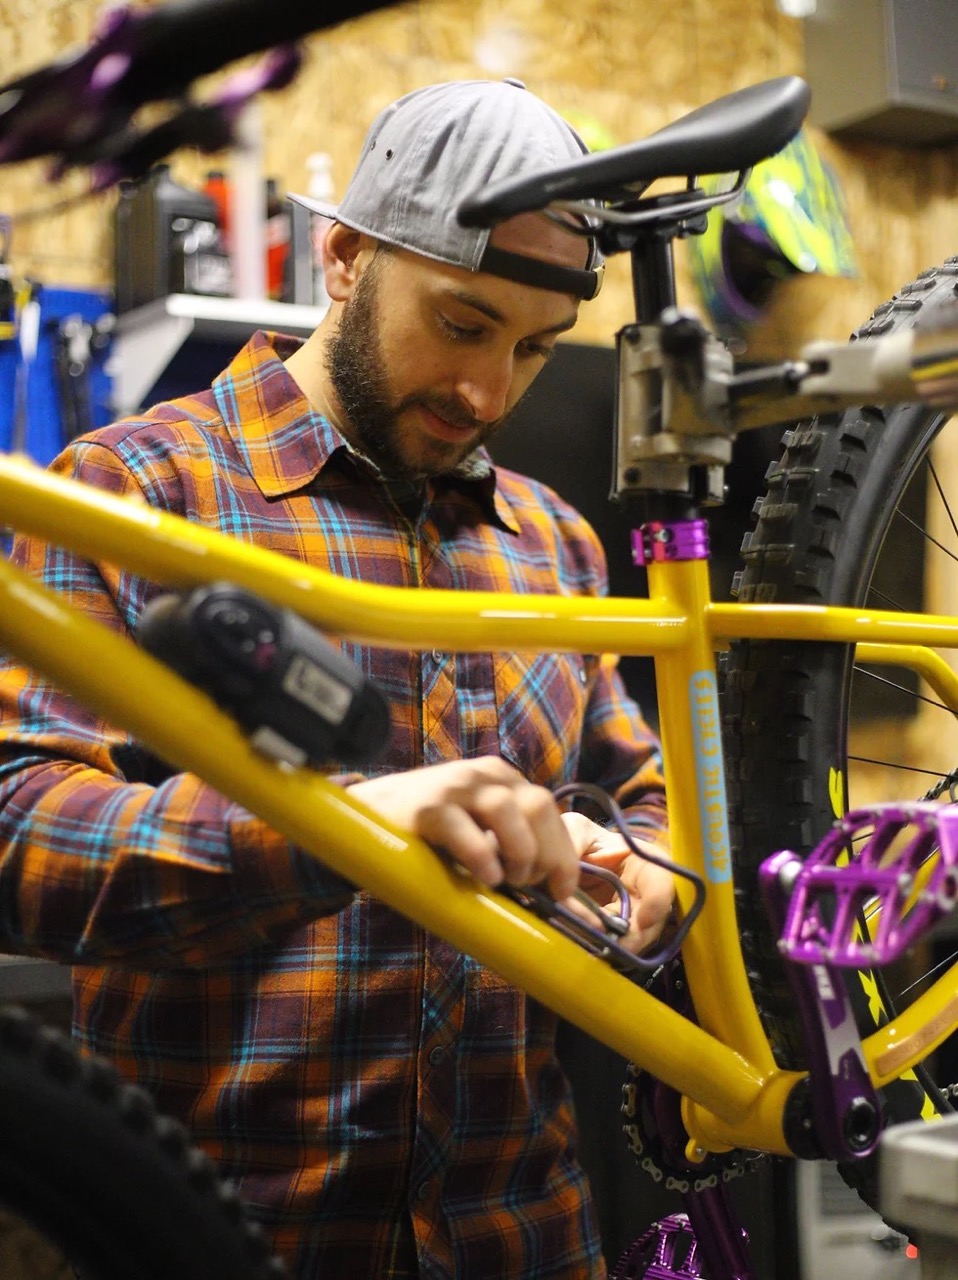 Zach from Acoustic Cycles